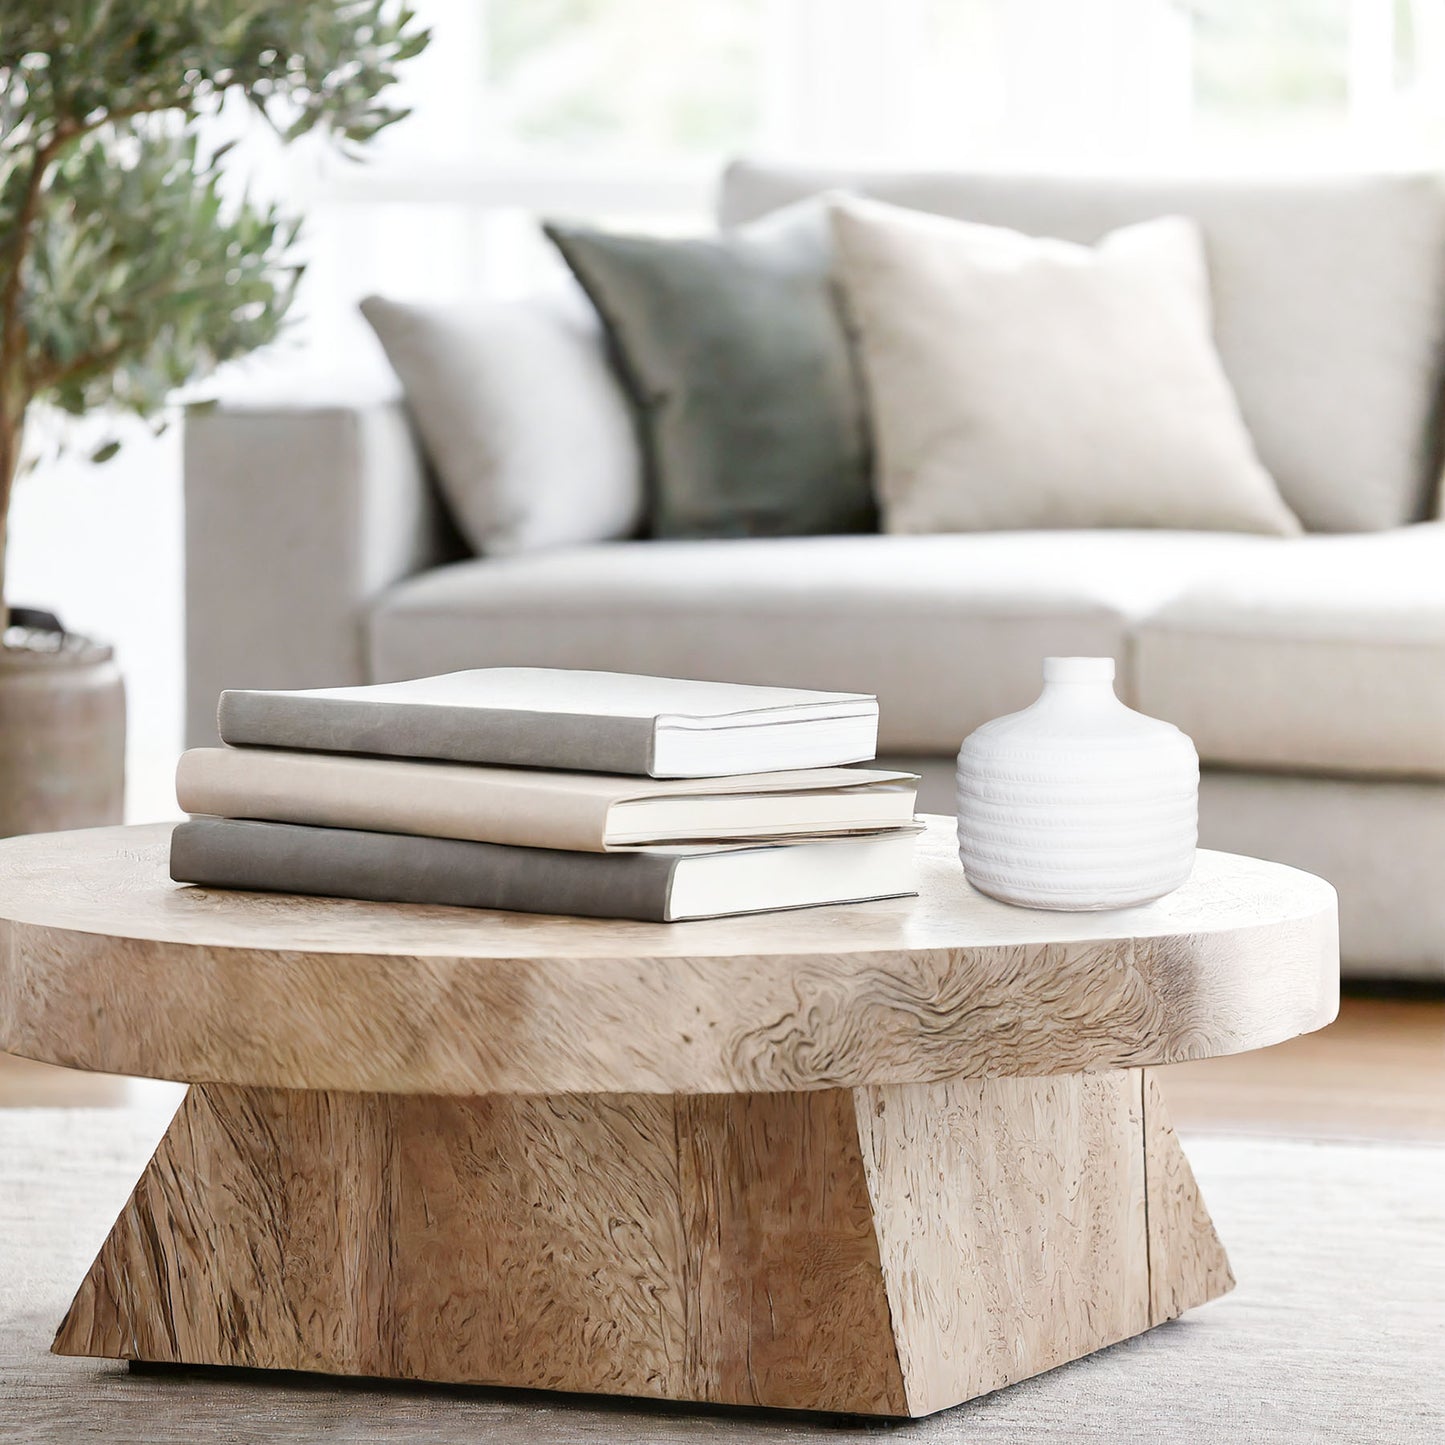 Decorative ceramic white vase with textured banding on coffee table in living room.